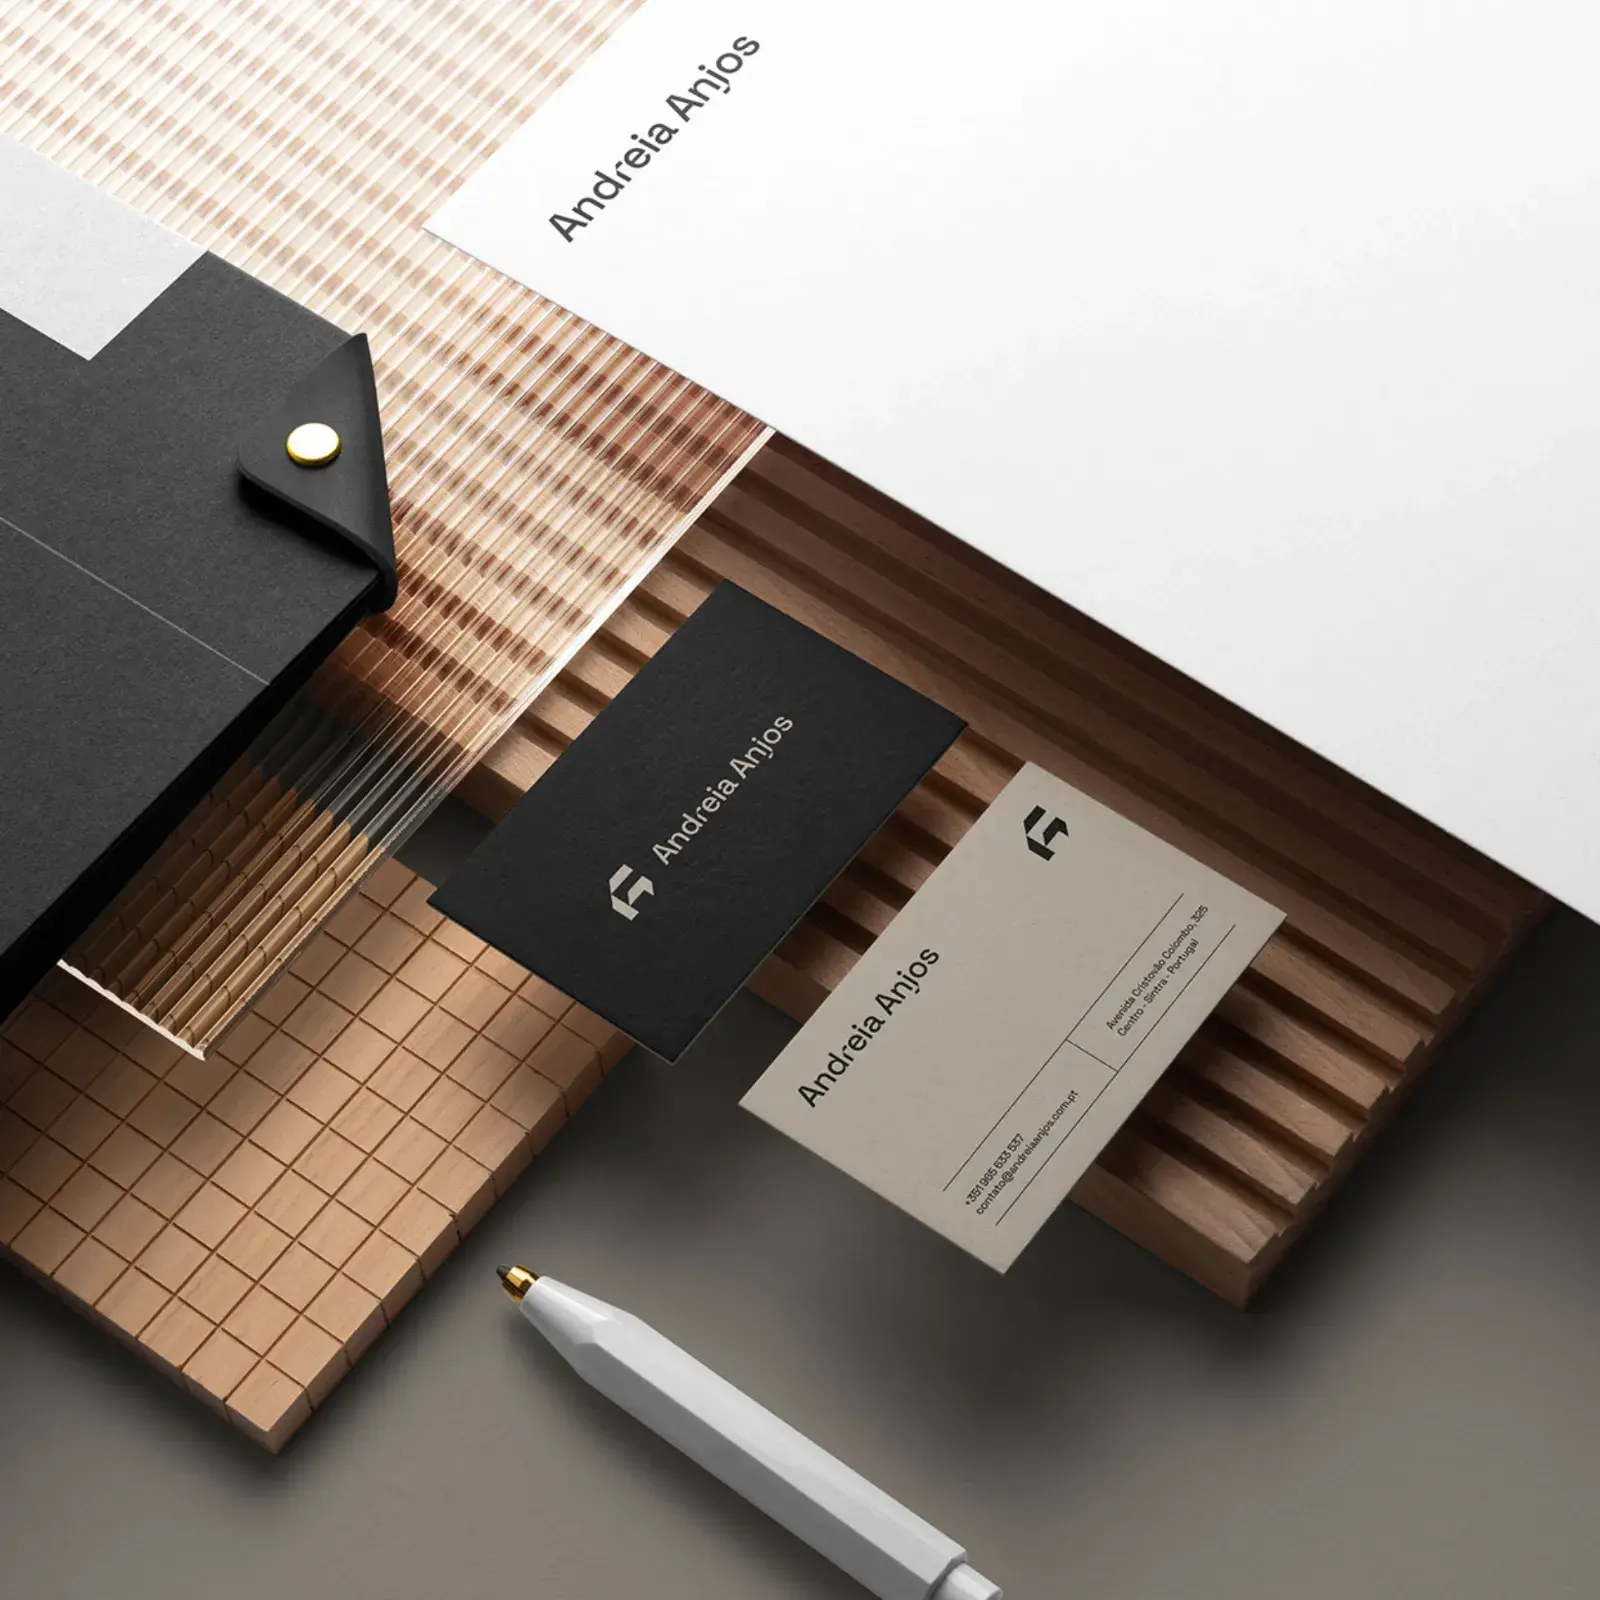 Stylish branding project for architecture firm 